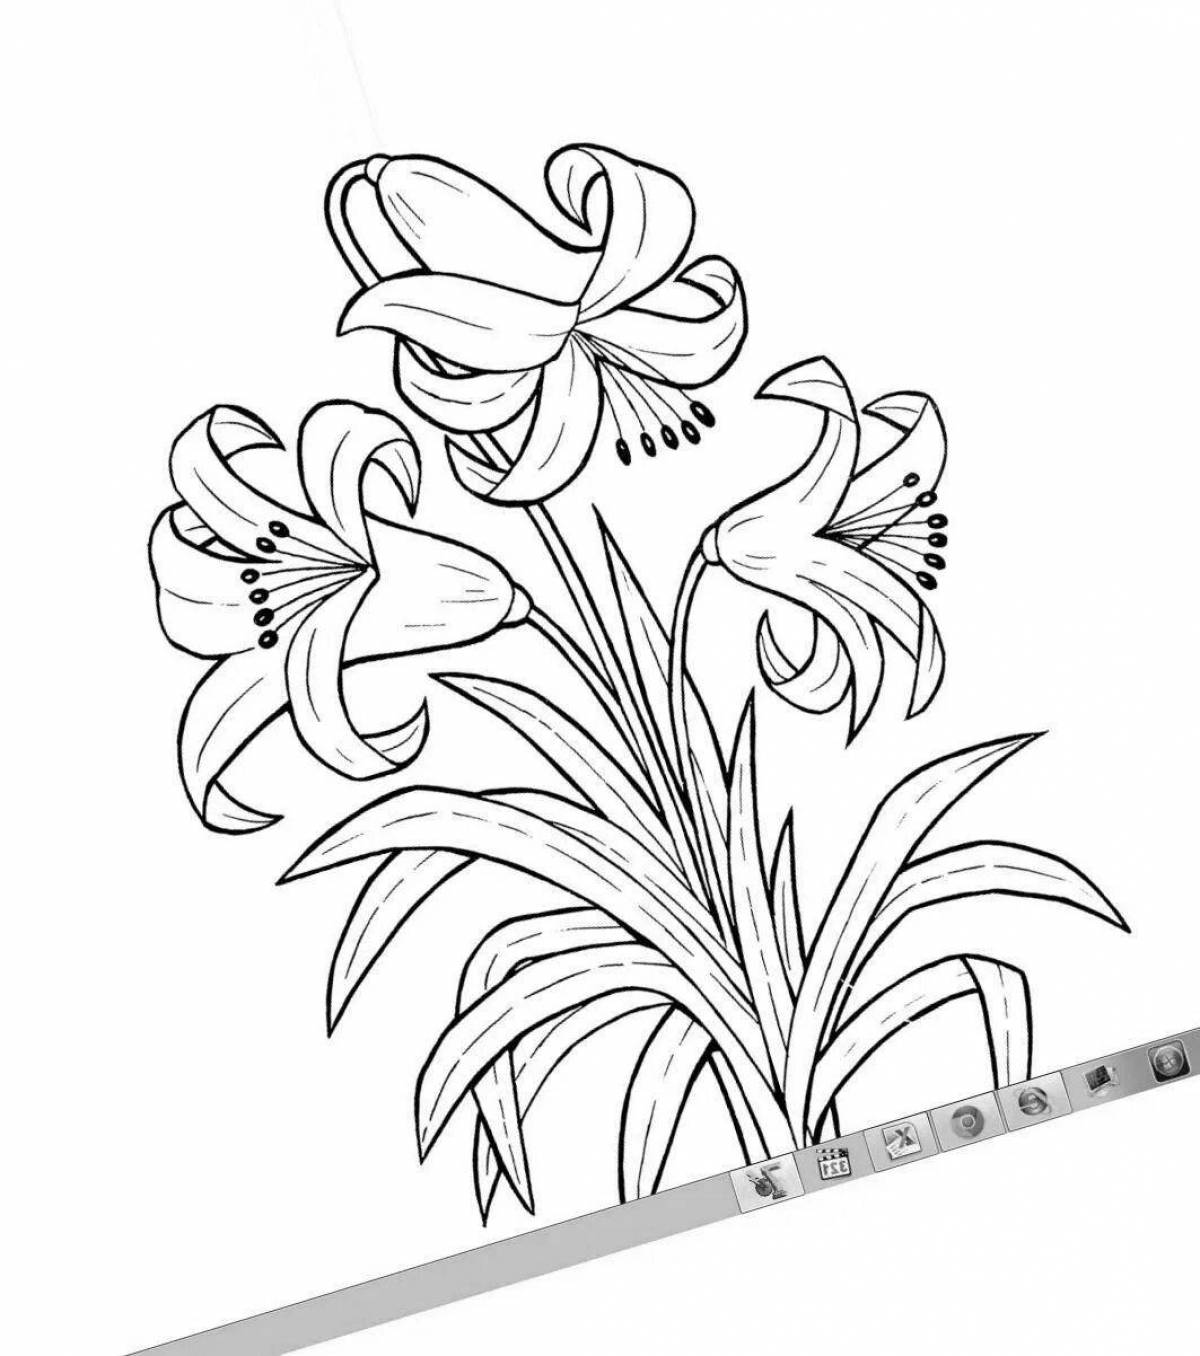 Rainbow lily coloring book for kids